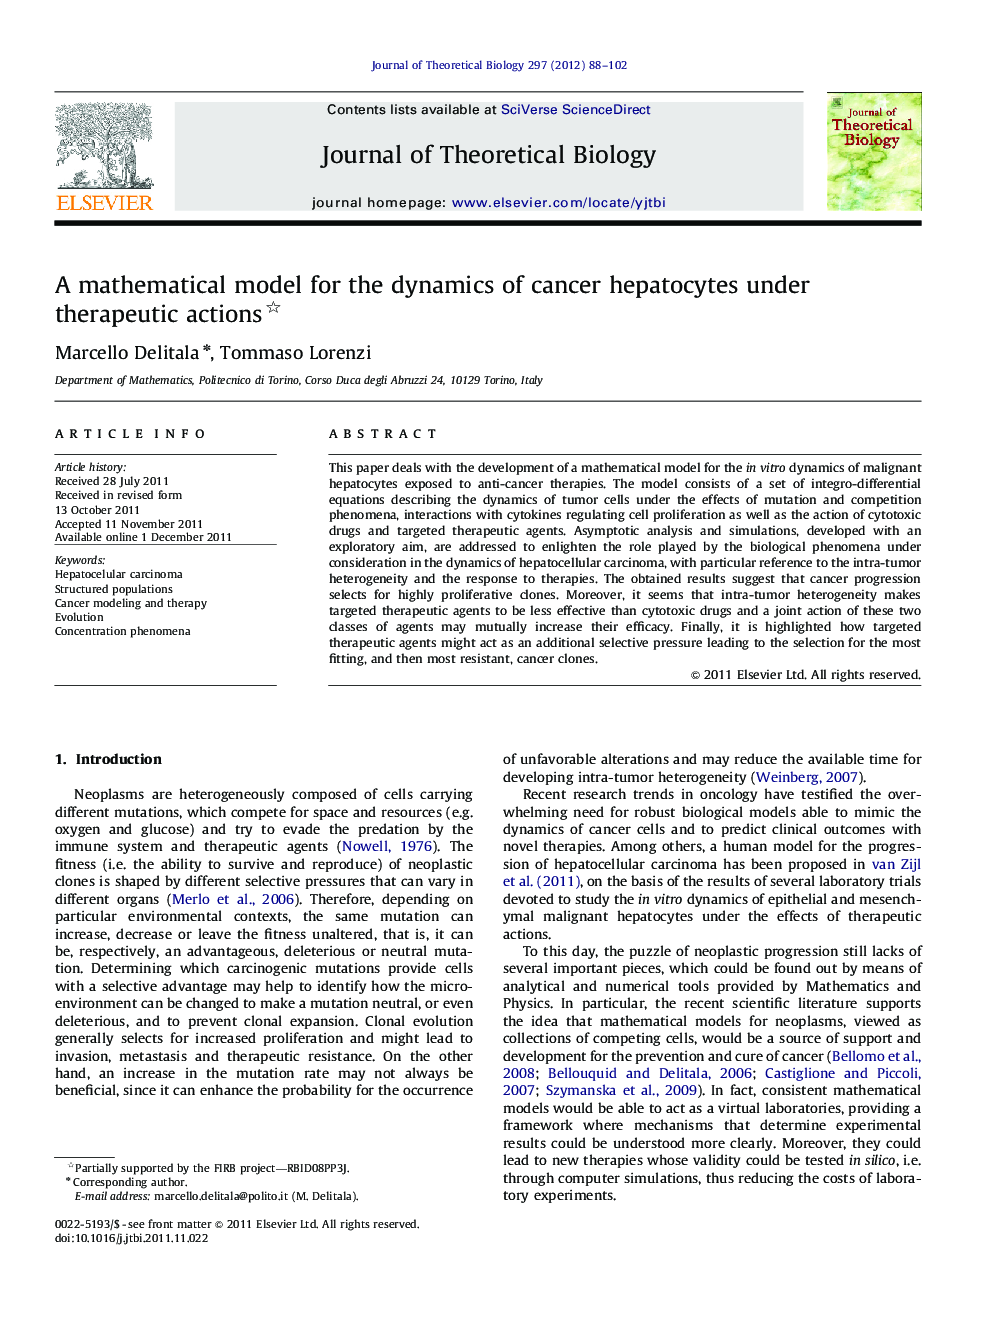 A mathematical model for the dynamics of cancer hepatocytes under therapeutic actions